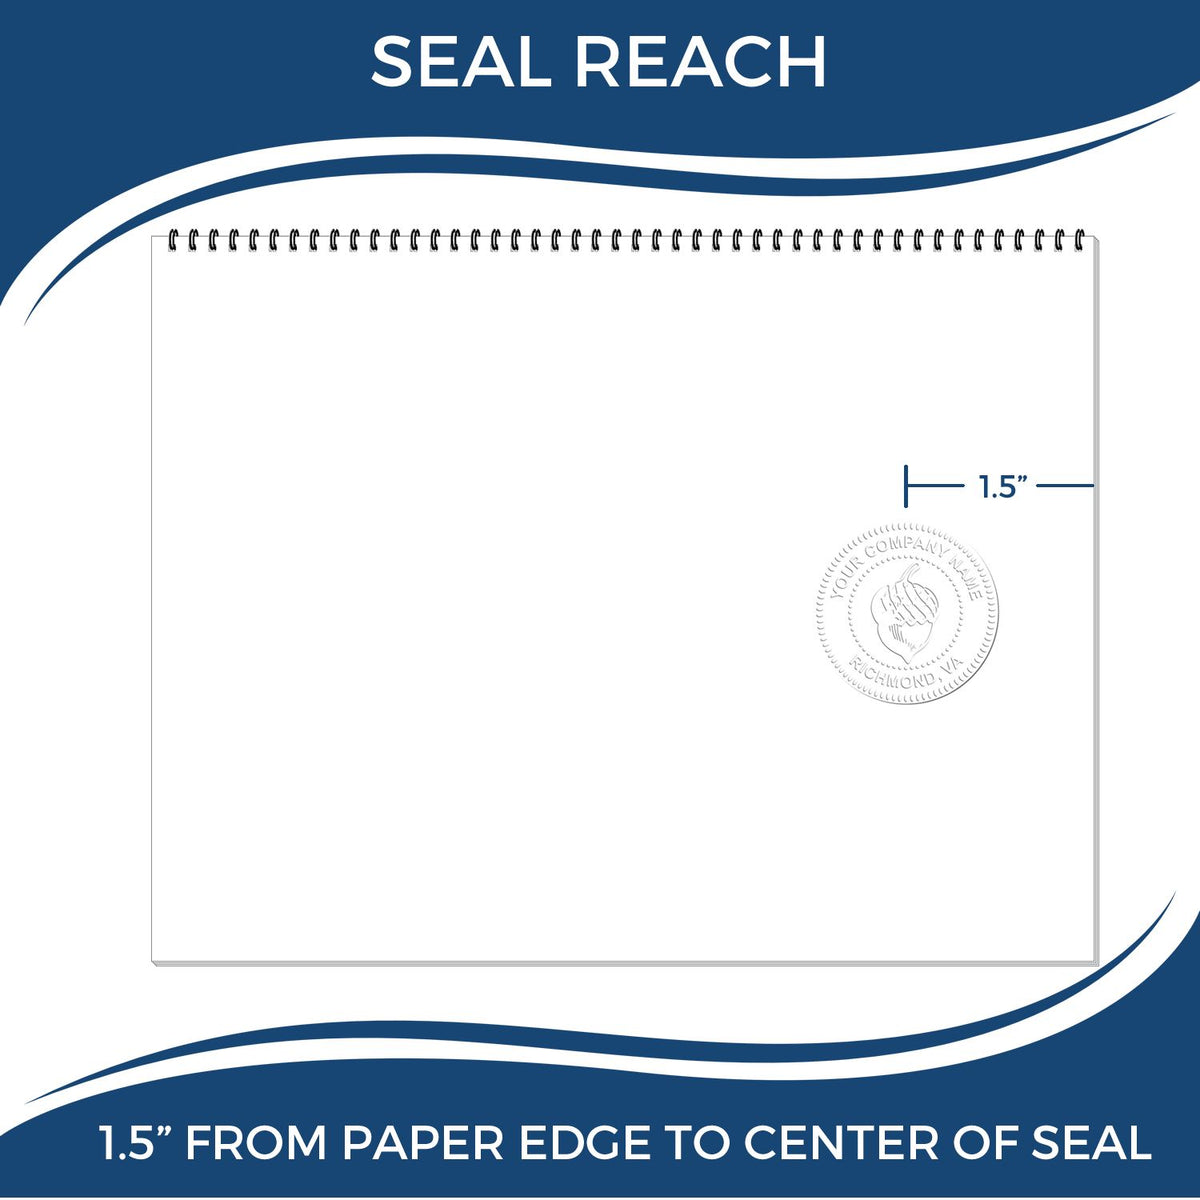 An infographic showing the seal reach which is represented by a ruler and a miniature seal image of the Soft Oklahoma Professional Engineer Seal